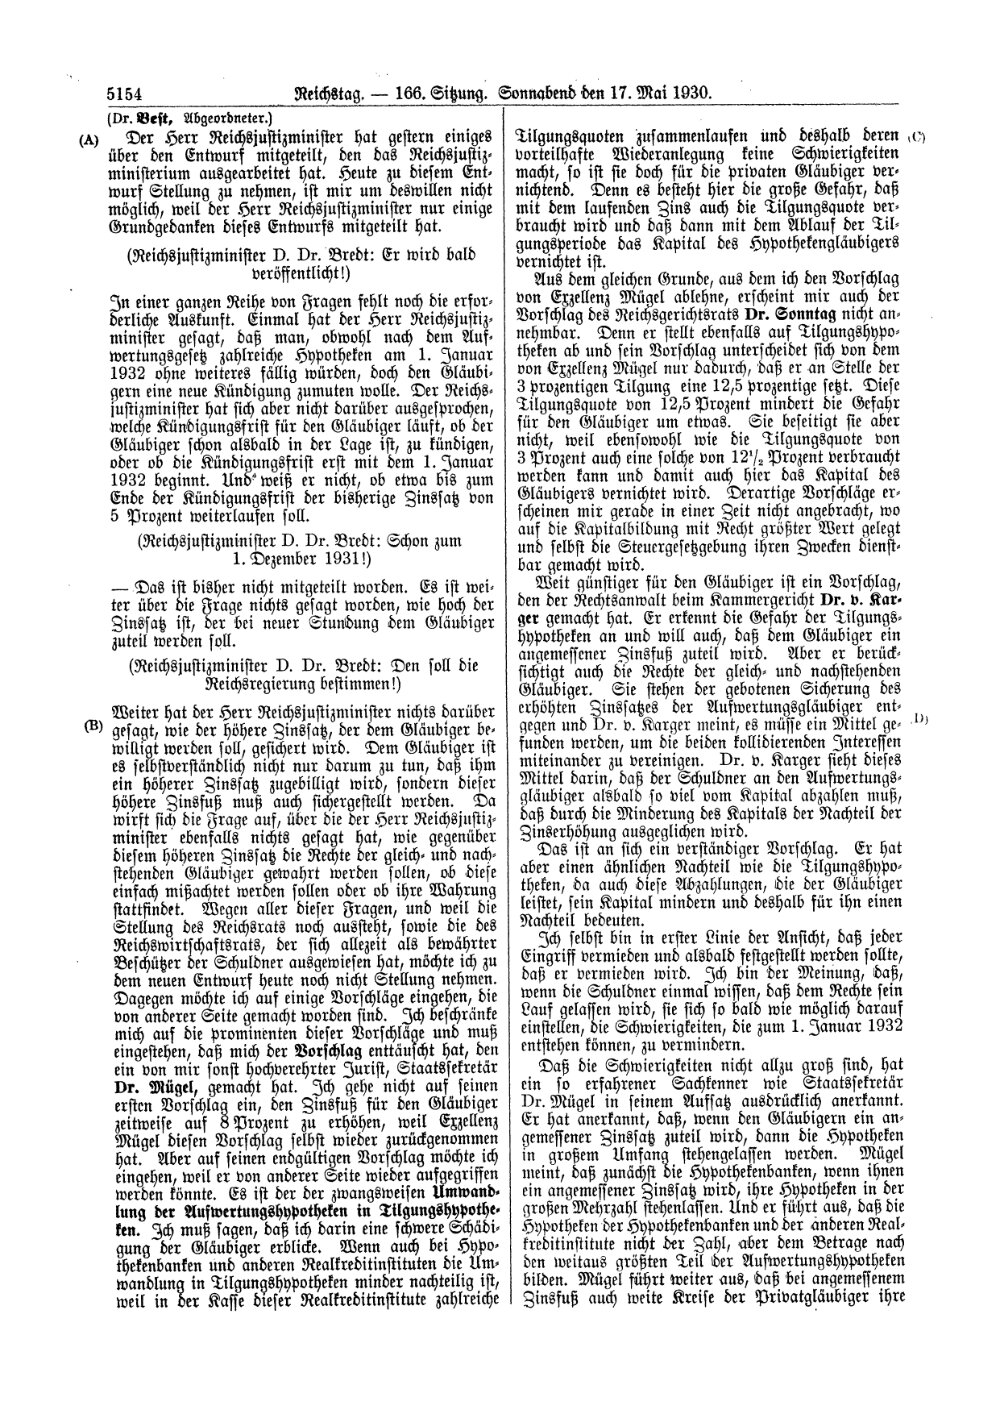 Scan of page 5154